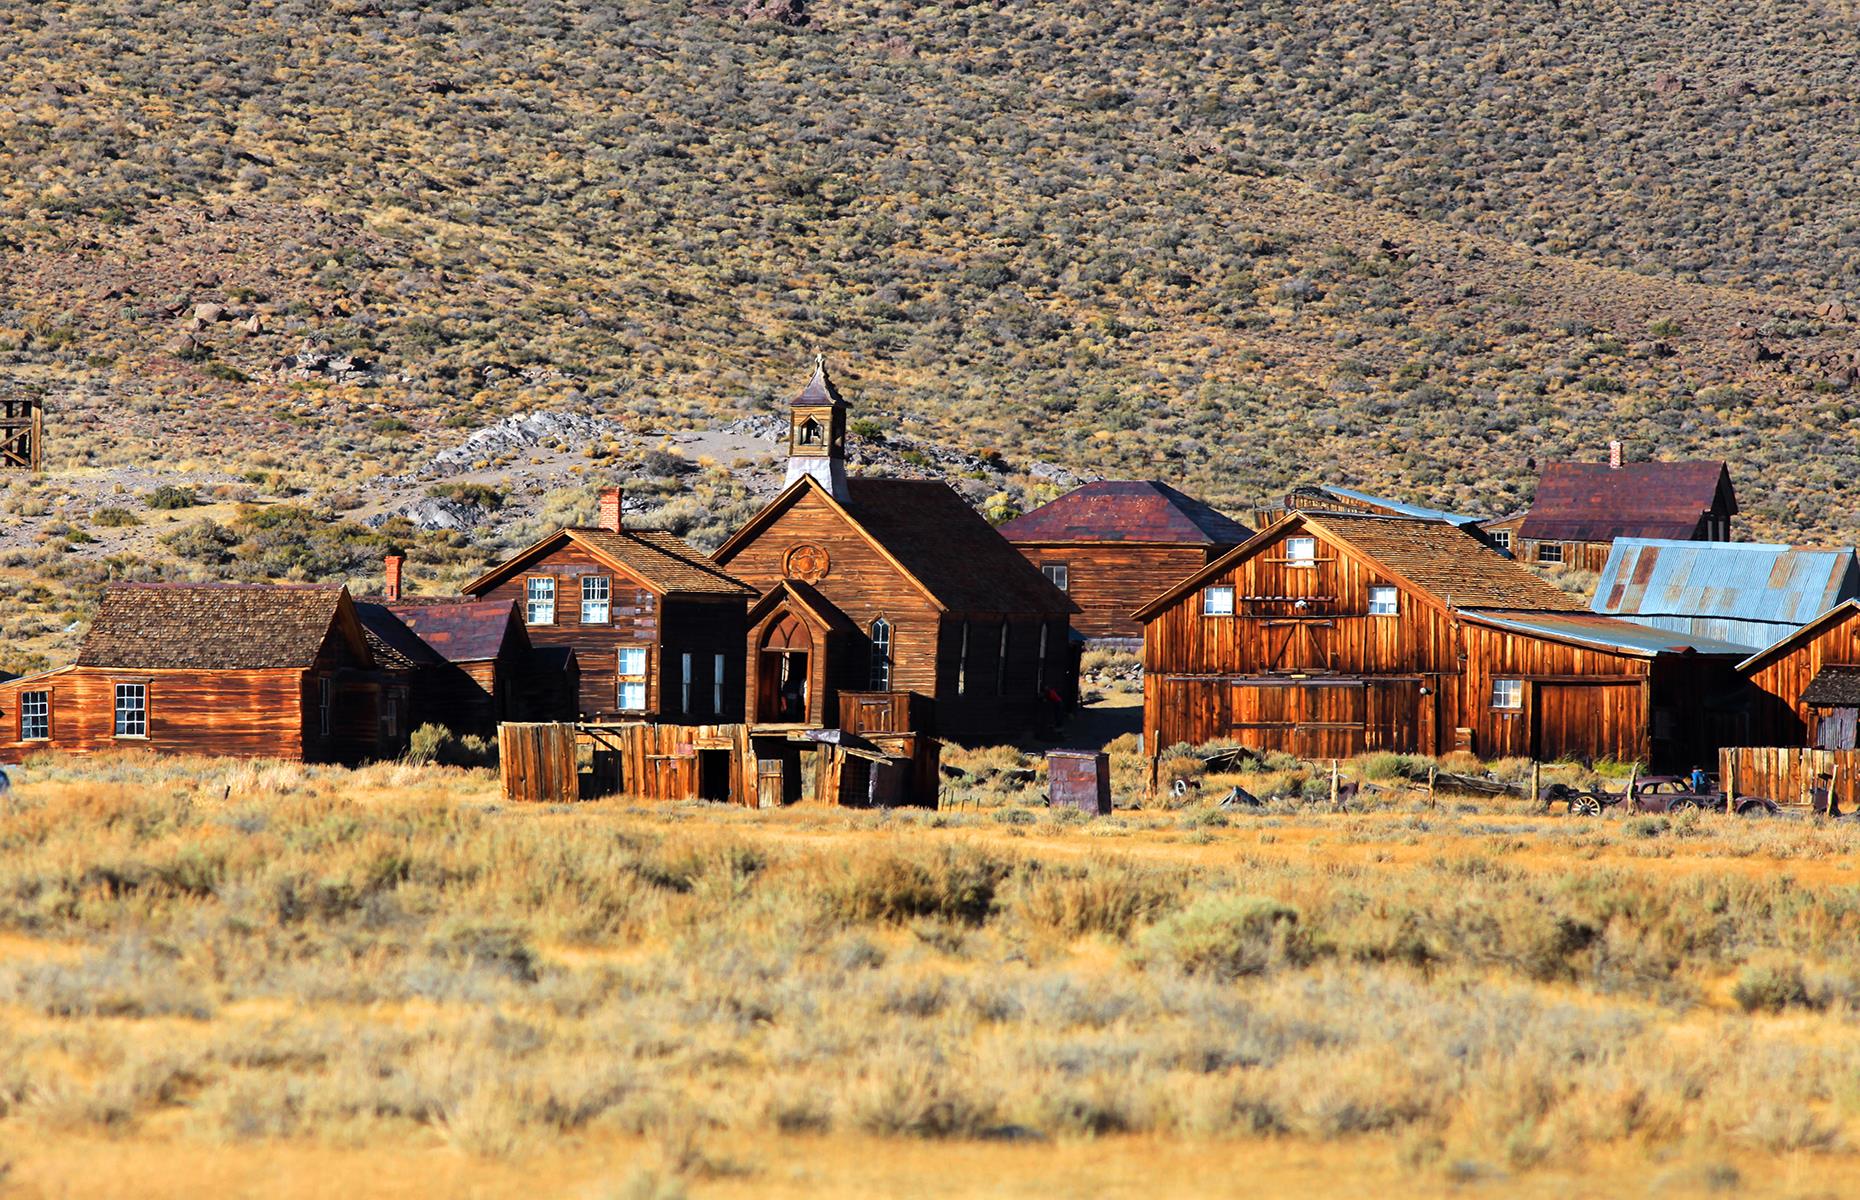 Frozen in time: the world's most fascinating ghost towns